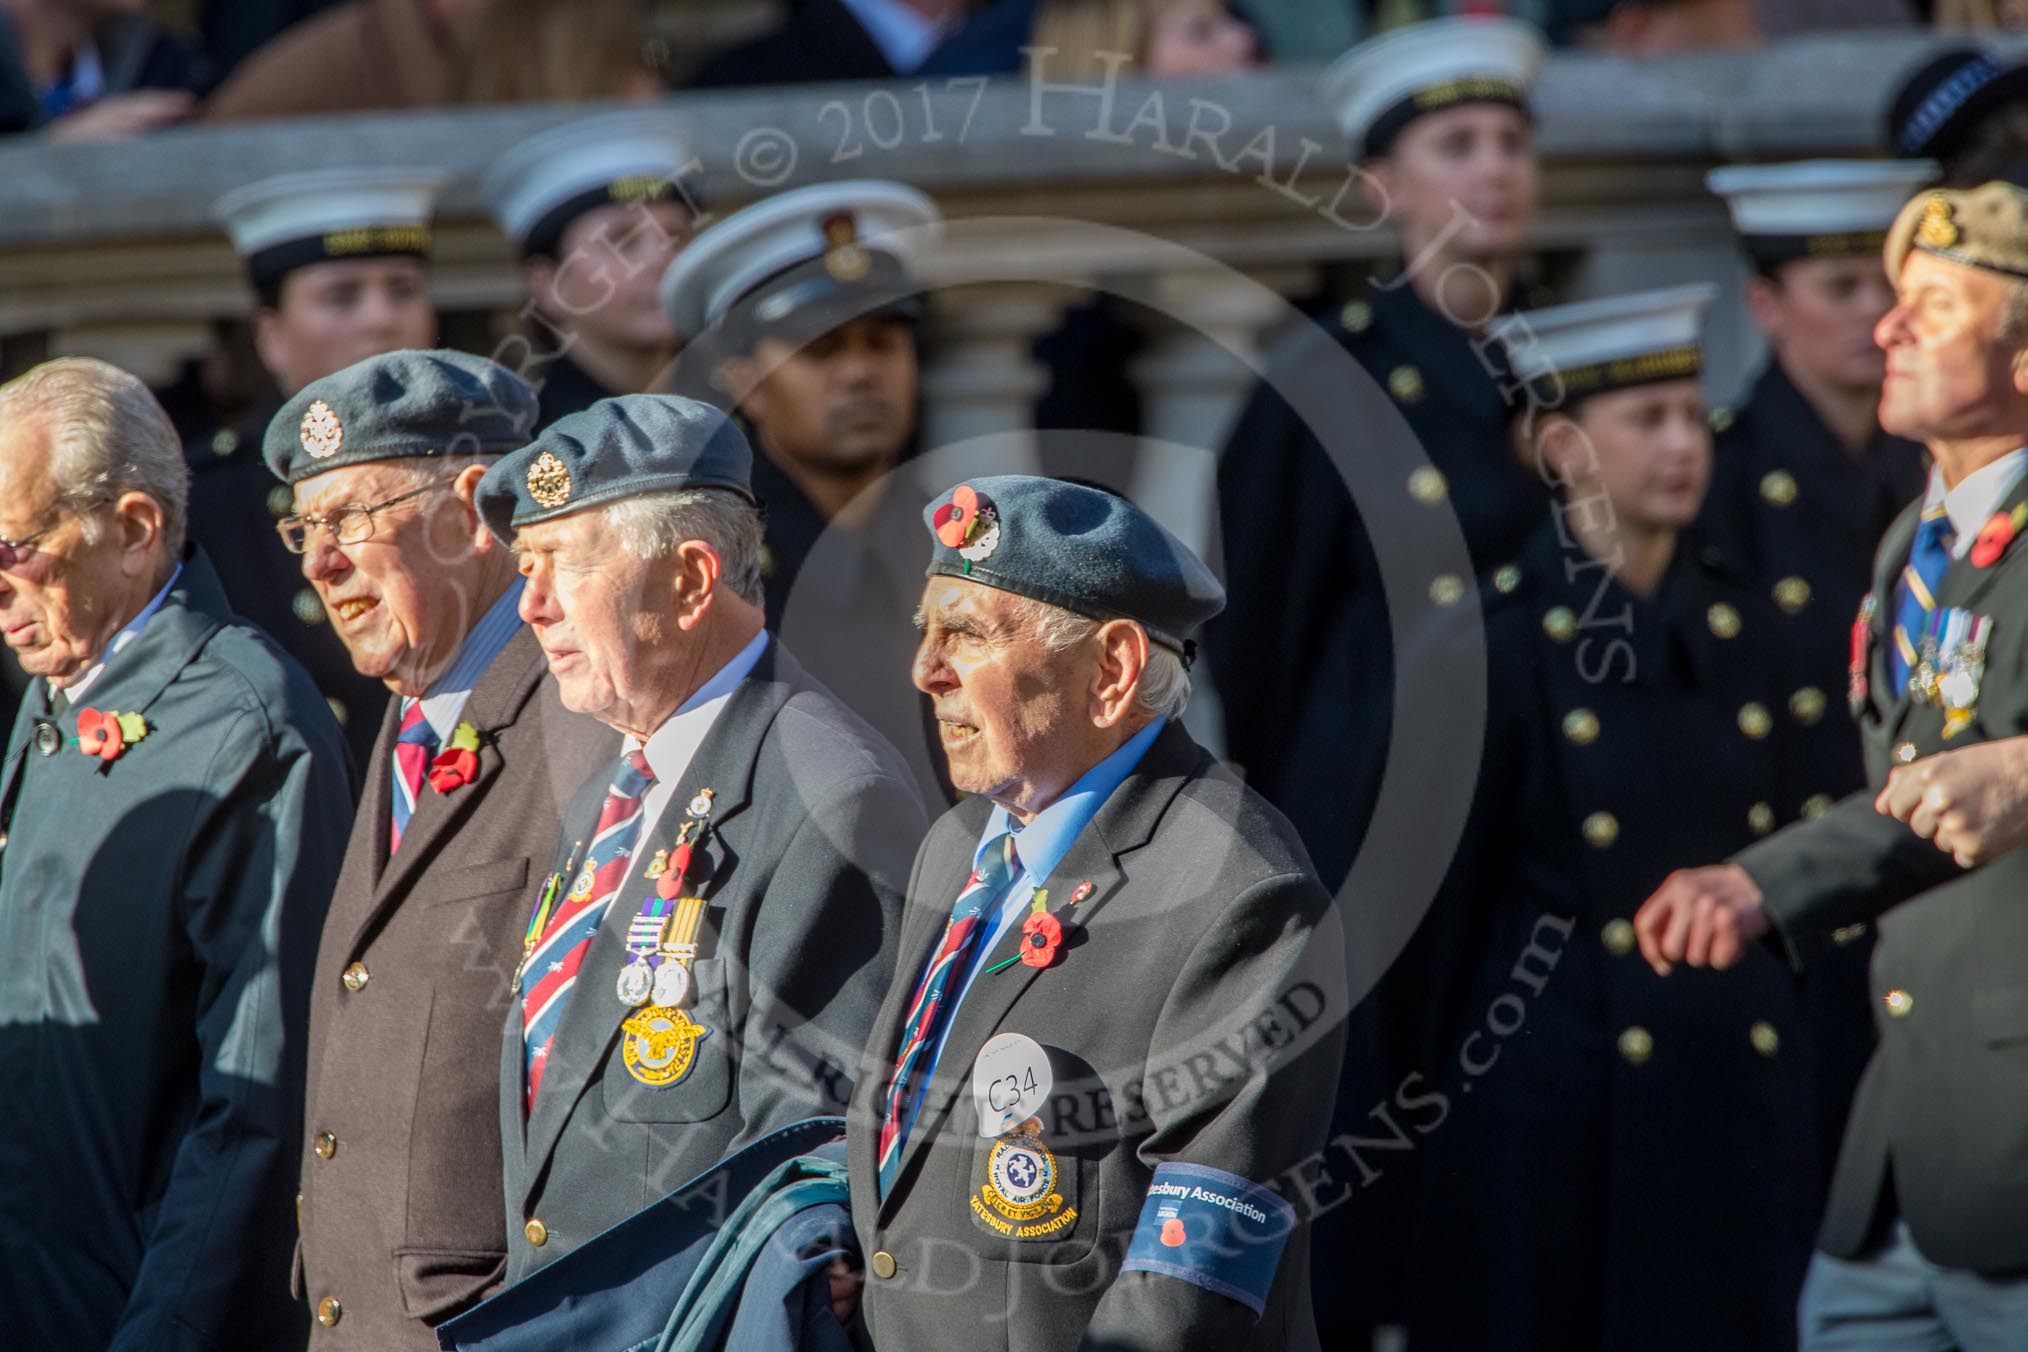 RAF Yatesbury Association (Group C34, 9 members) during the Royal British Legion March Past on Remembrance Sunday at the Cenotaph, Whitehall, Westminster, London, 11 November 2018, 12:19.